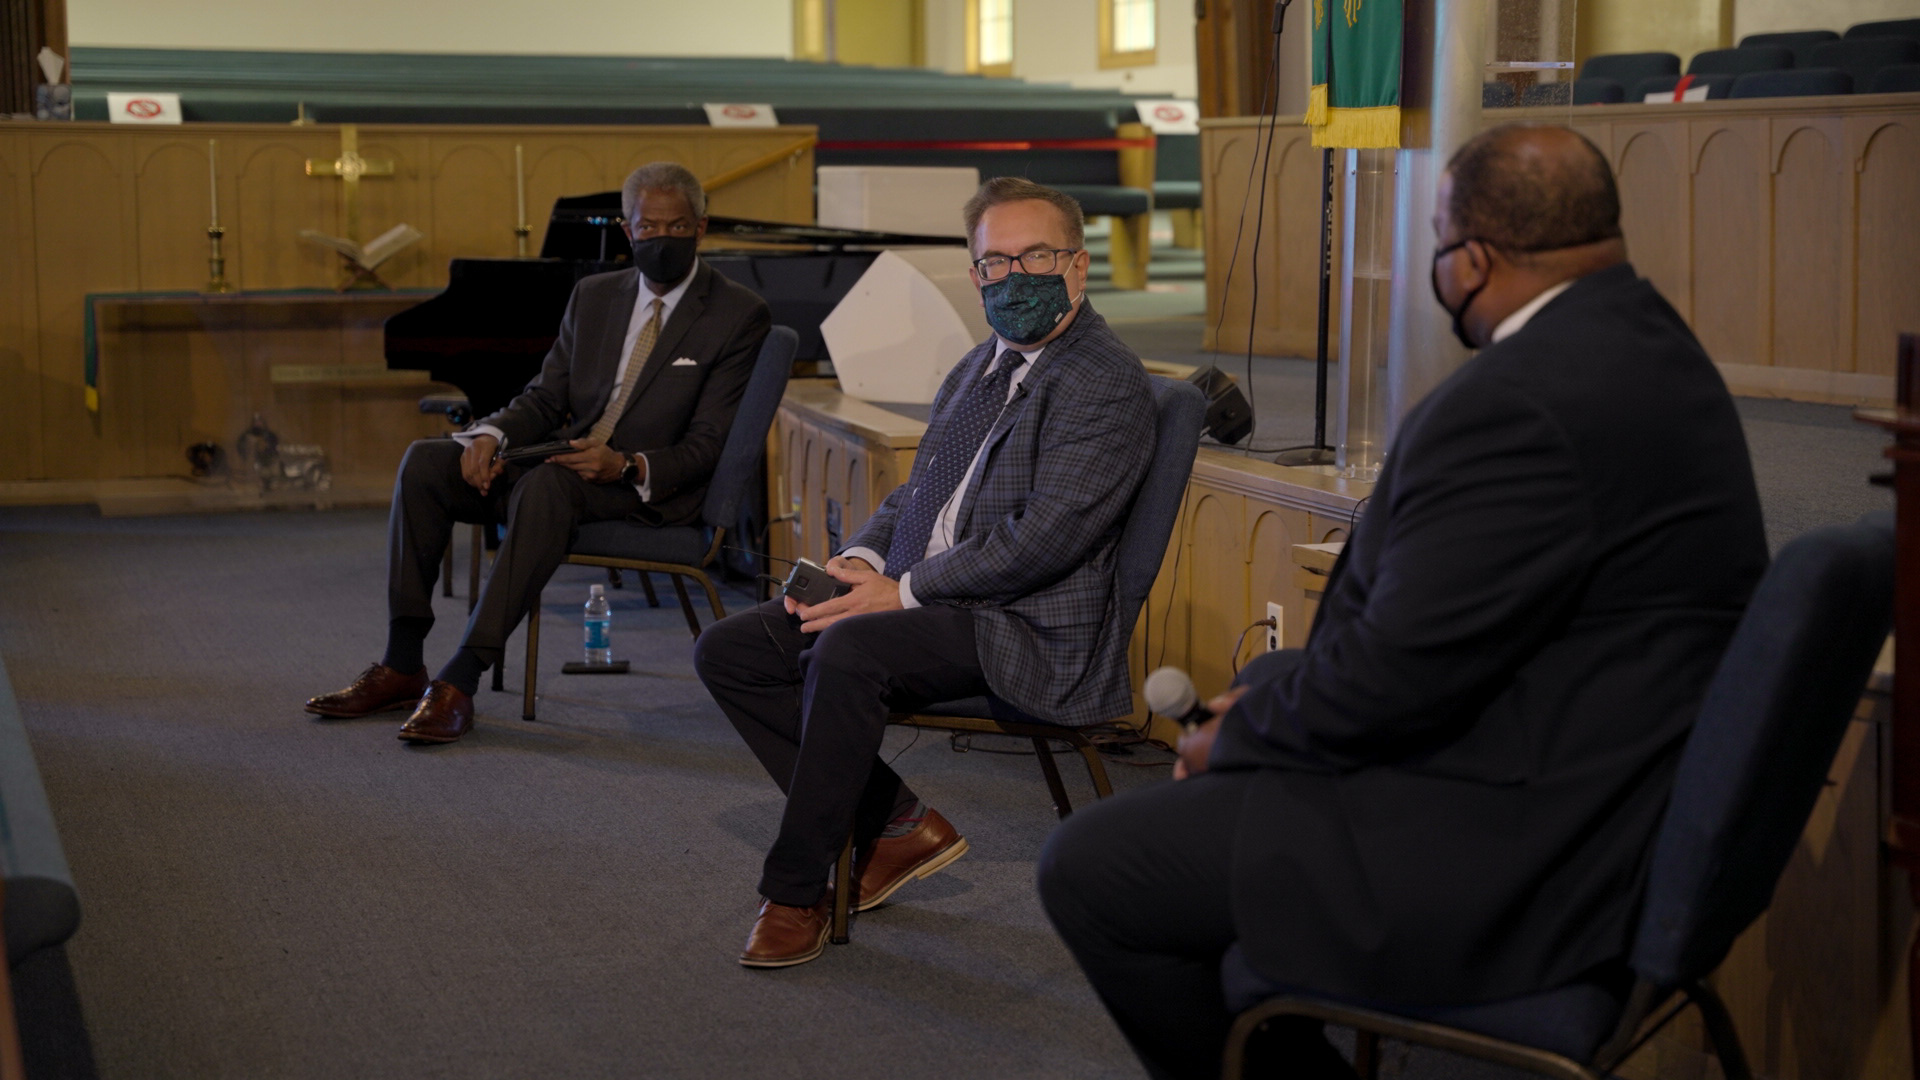 Administrator meets with faith leaders